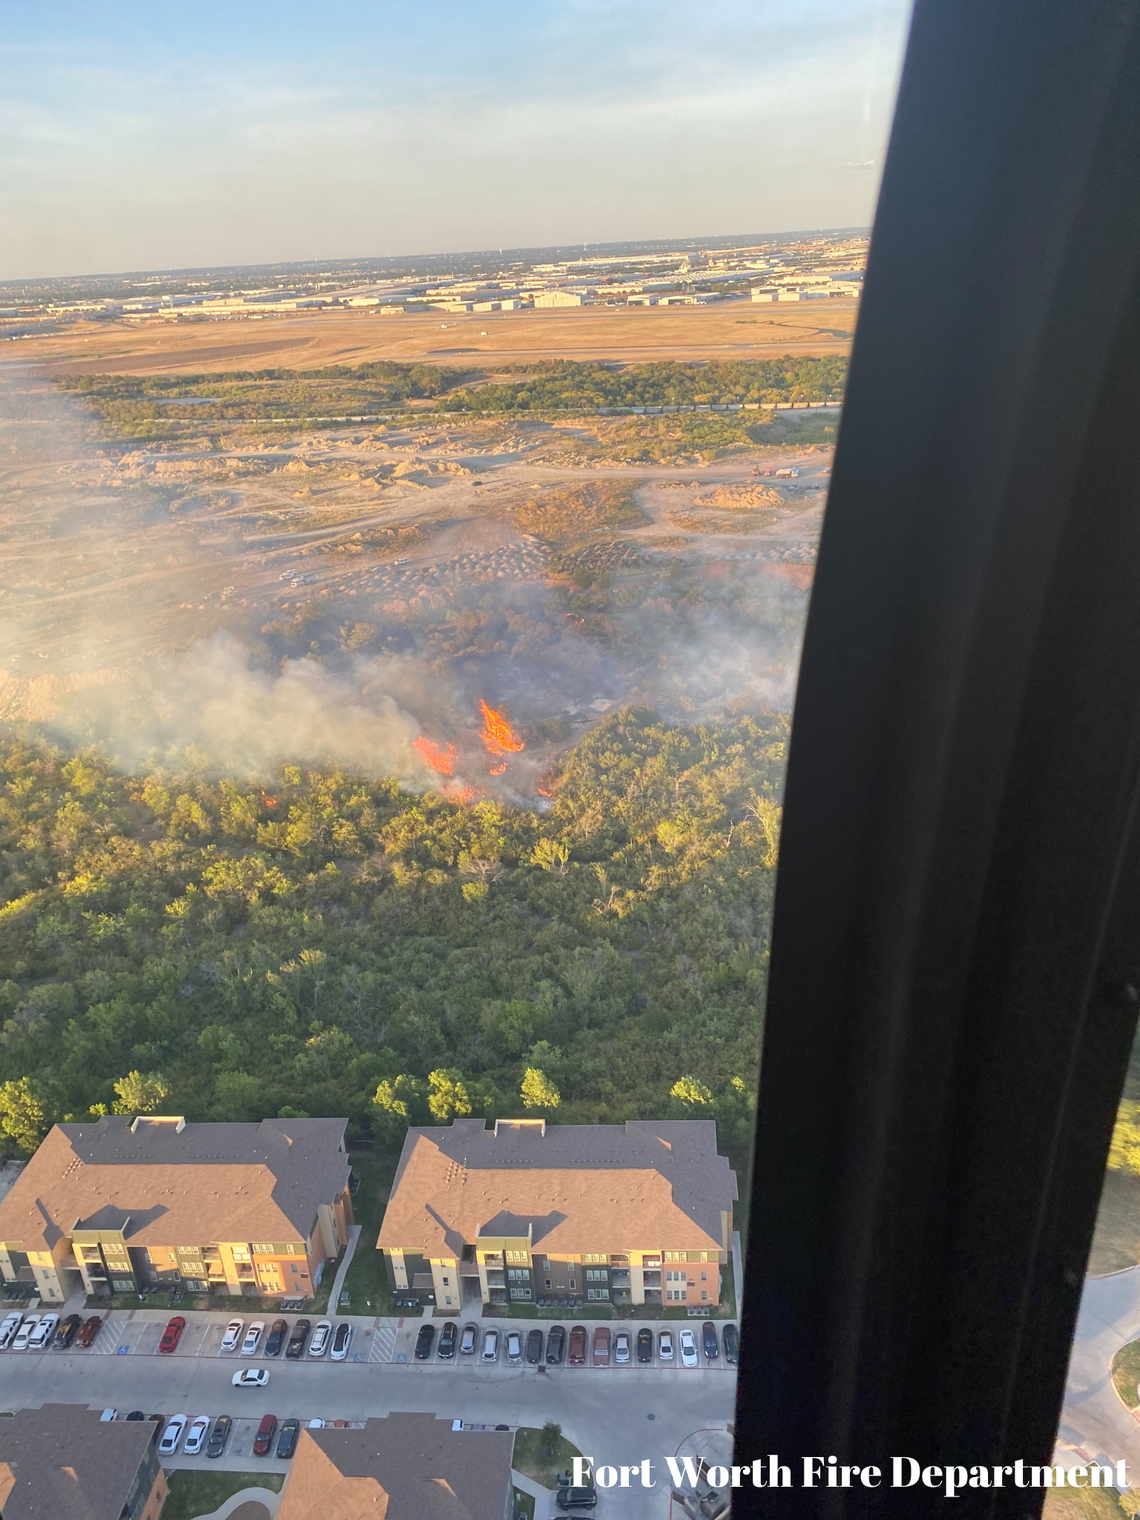 Julio Frausto, 32, was on July 28, 2022, arrested on suspicion of arson in connection with a grass fire in Fort Worth.